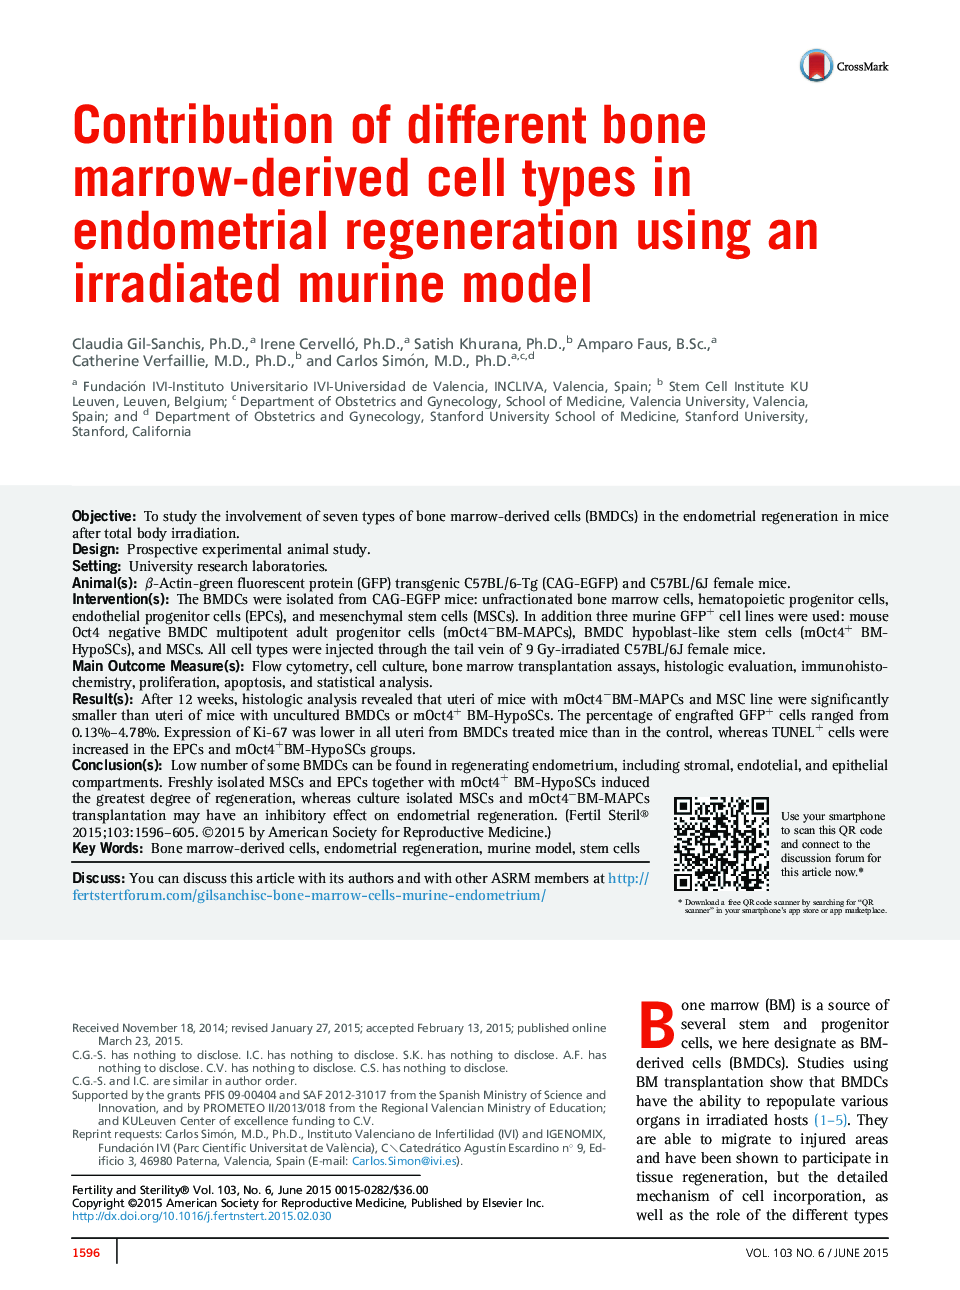 Contribution of different bone marrow-derived cell types in endometrial regeneration using an irradiated murine model